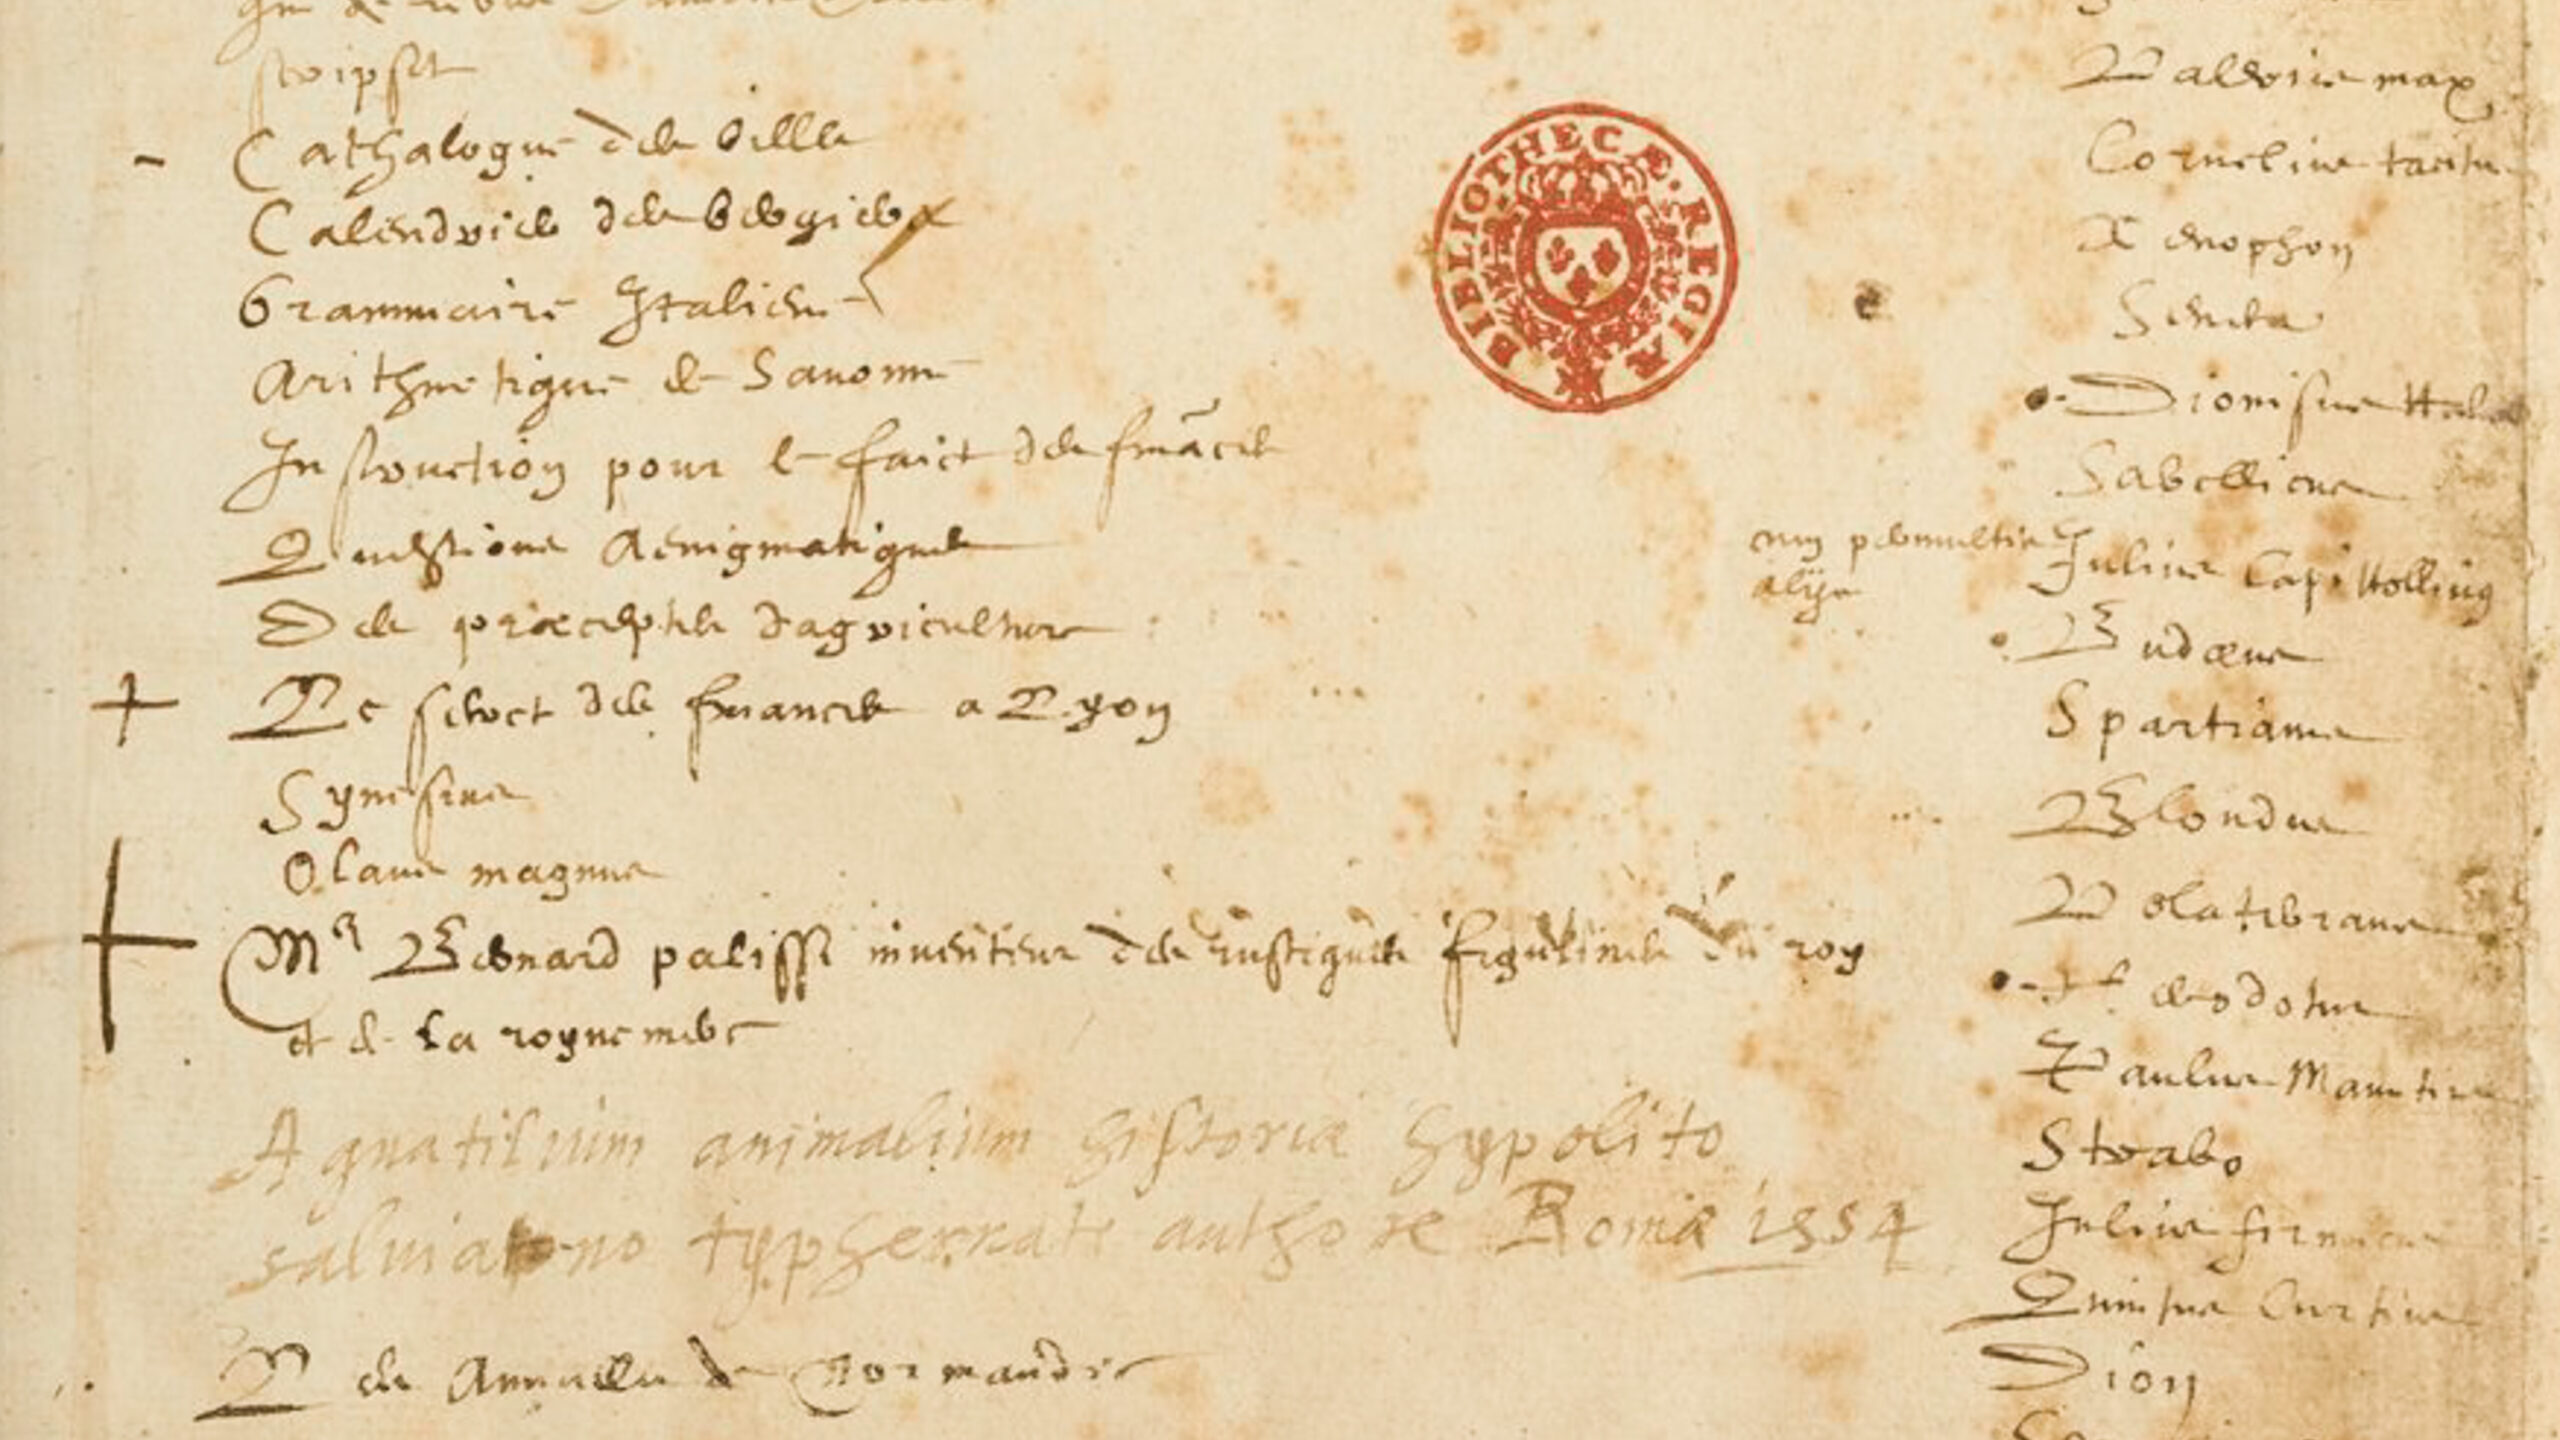 An original page from a manuscript in the "Secrets of Craft and Nature" project, which offers English and French translations of alchemical recipes and texts.